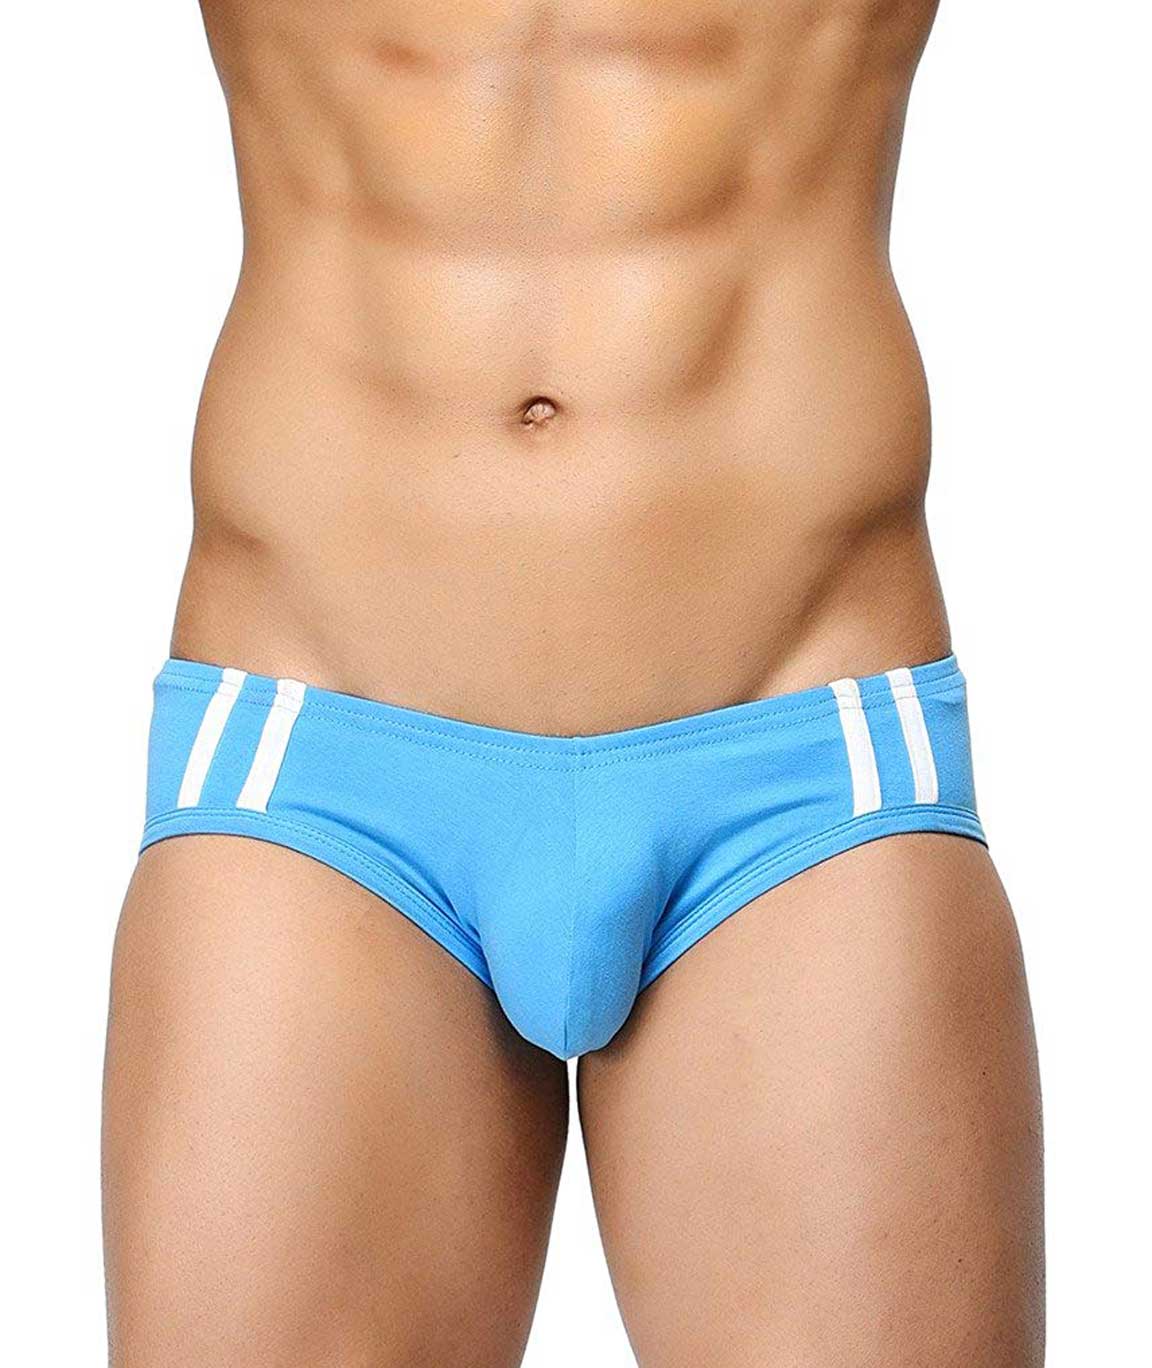 BASIICS by La Intimo Men`s Blue Cotton Spandex Striped and Solid